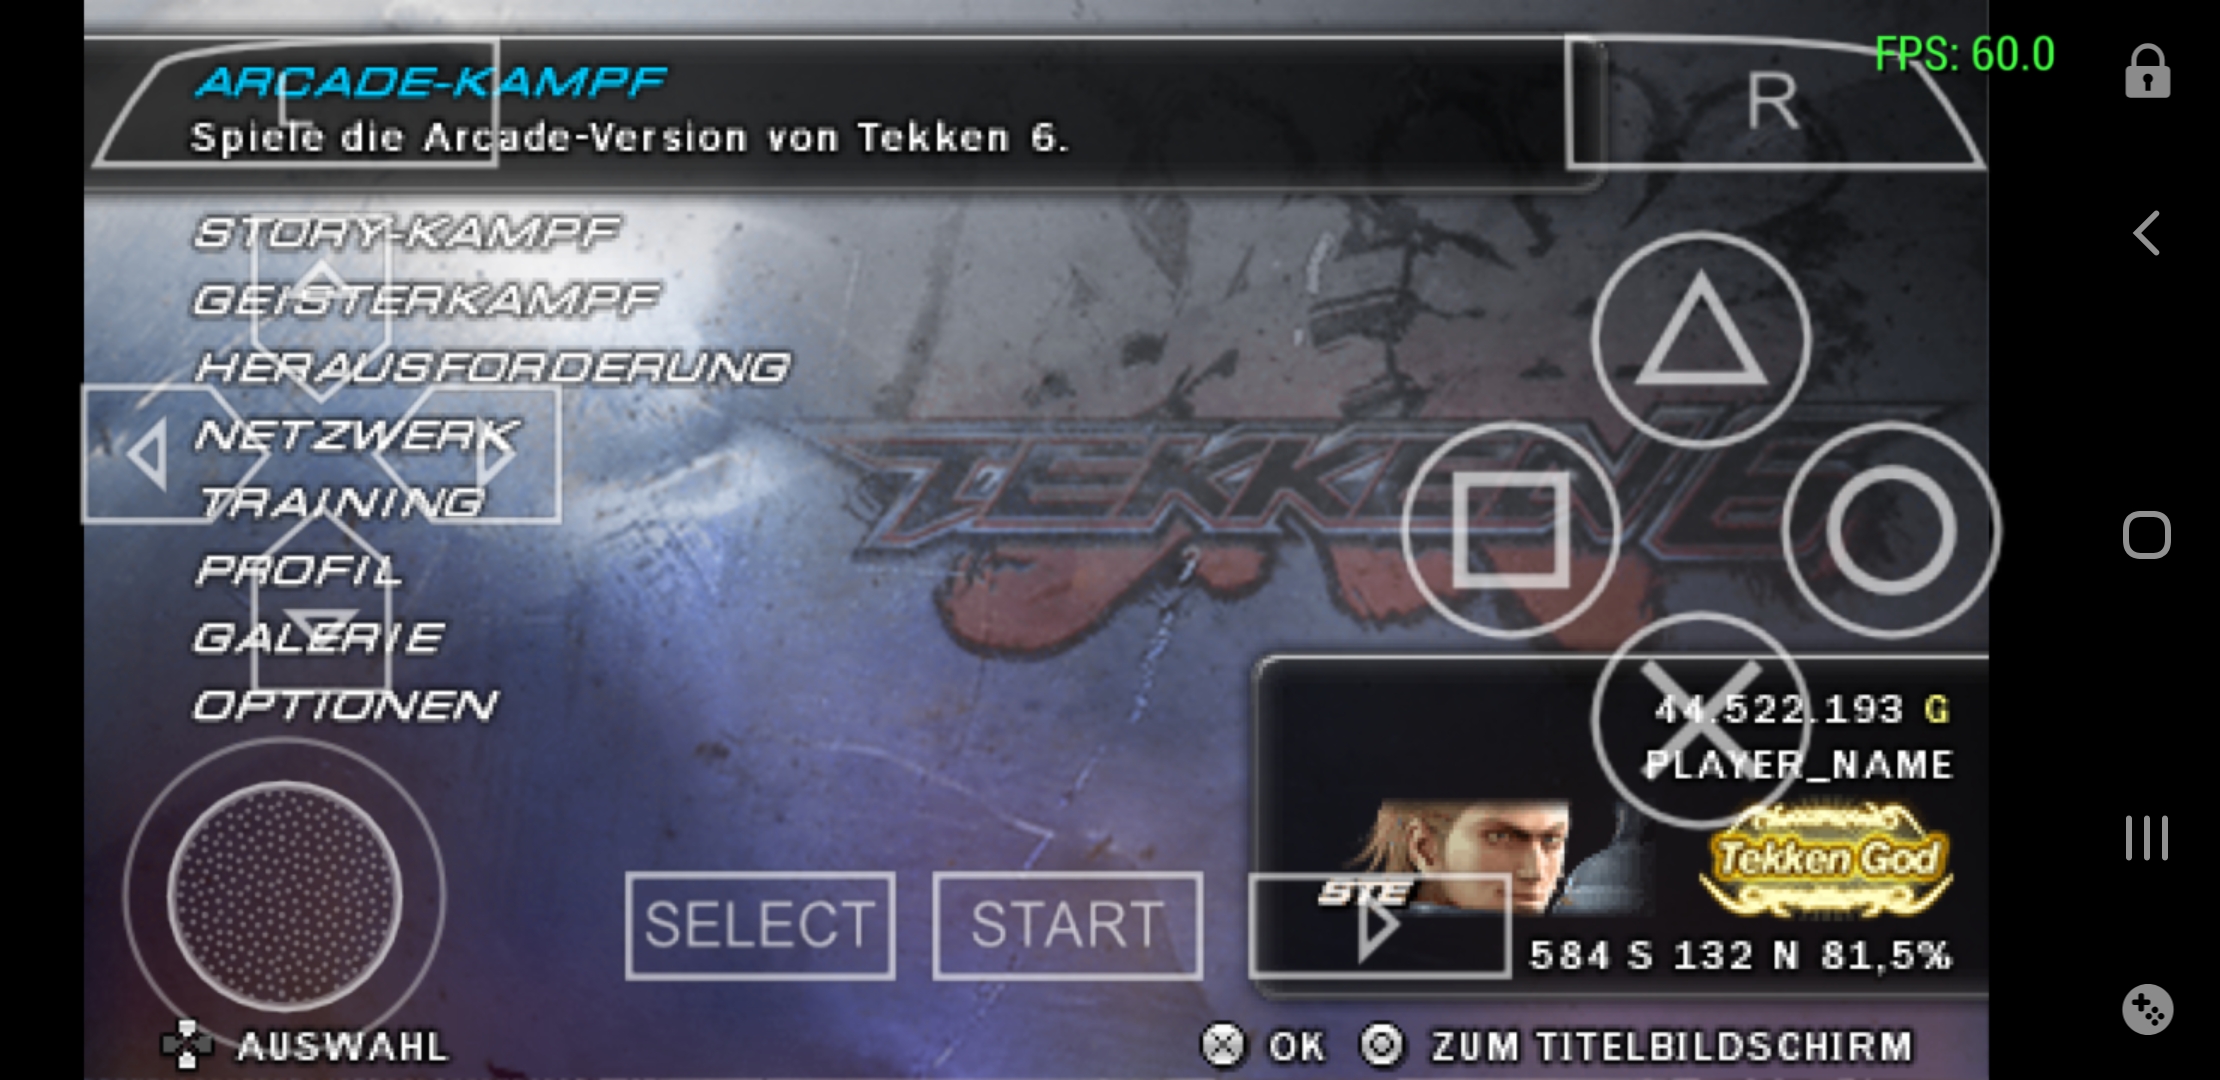 Taken 6 for ppsspp download